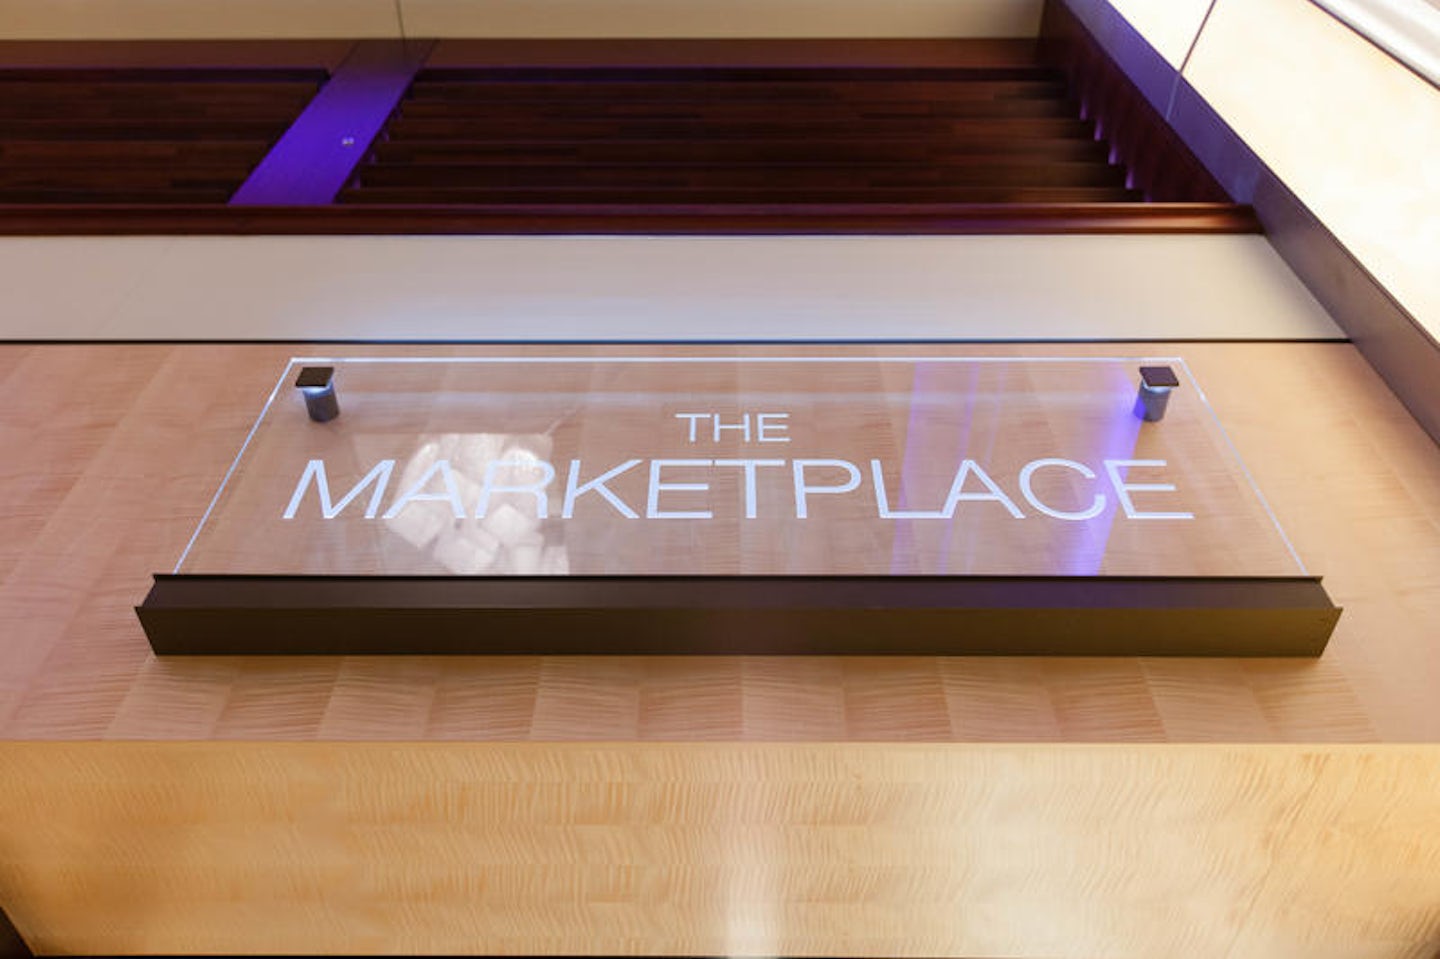 The Market Place on Celebrity Silhouette